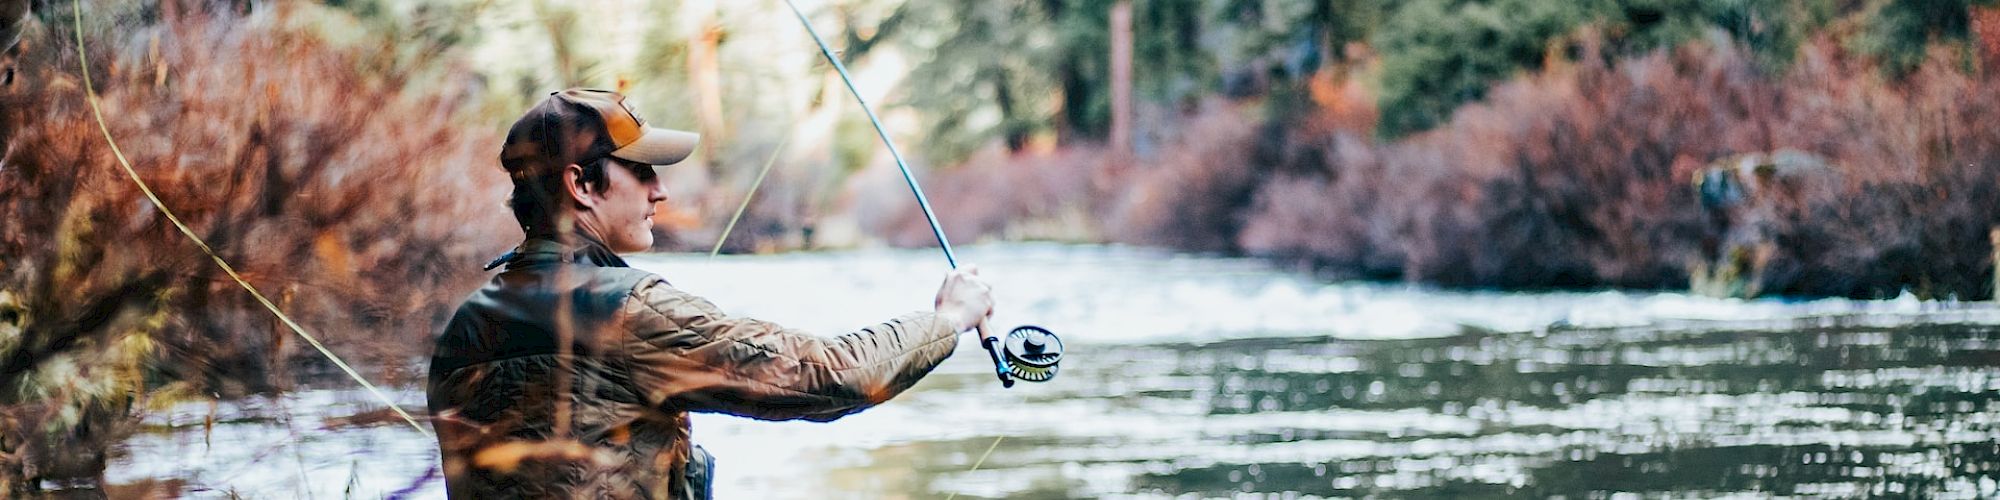 Master the Art of Fly Fishing with Orvis Fly Fishing School: Learn